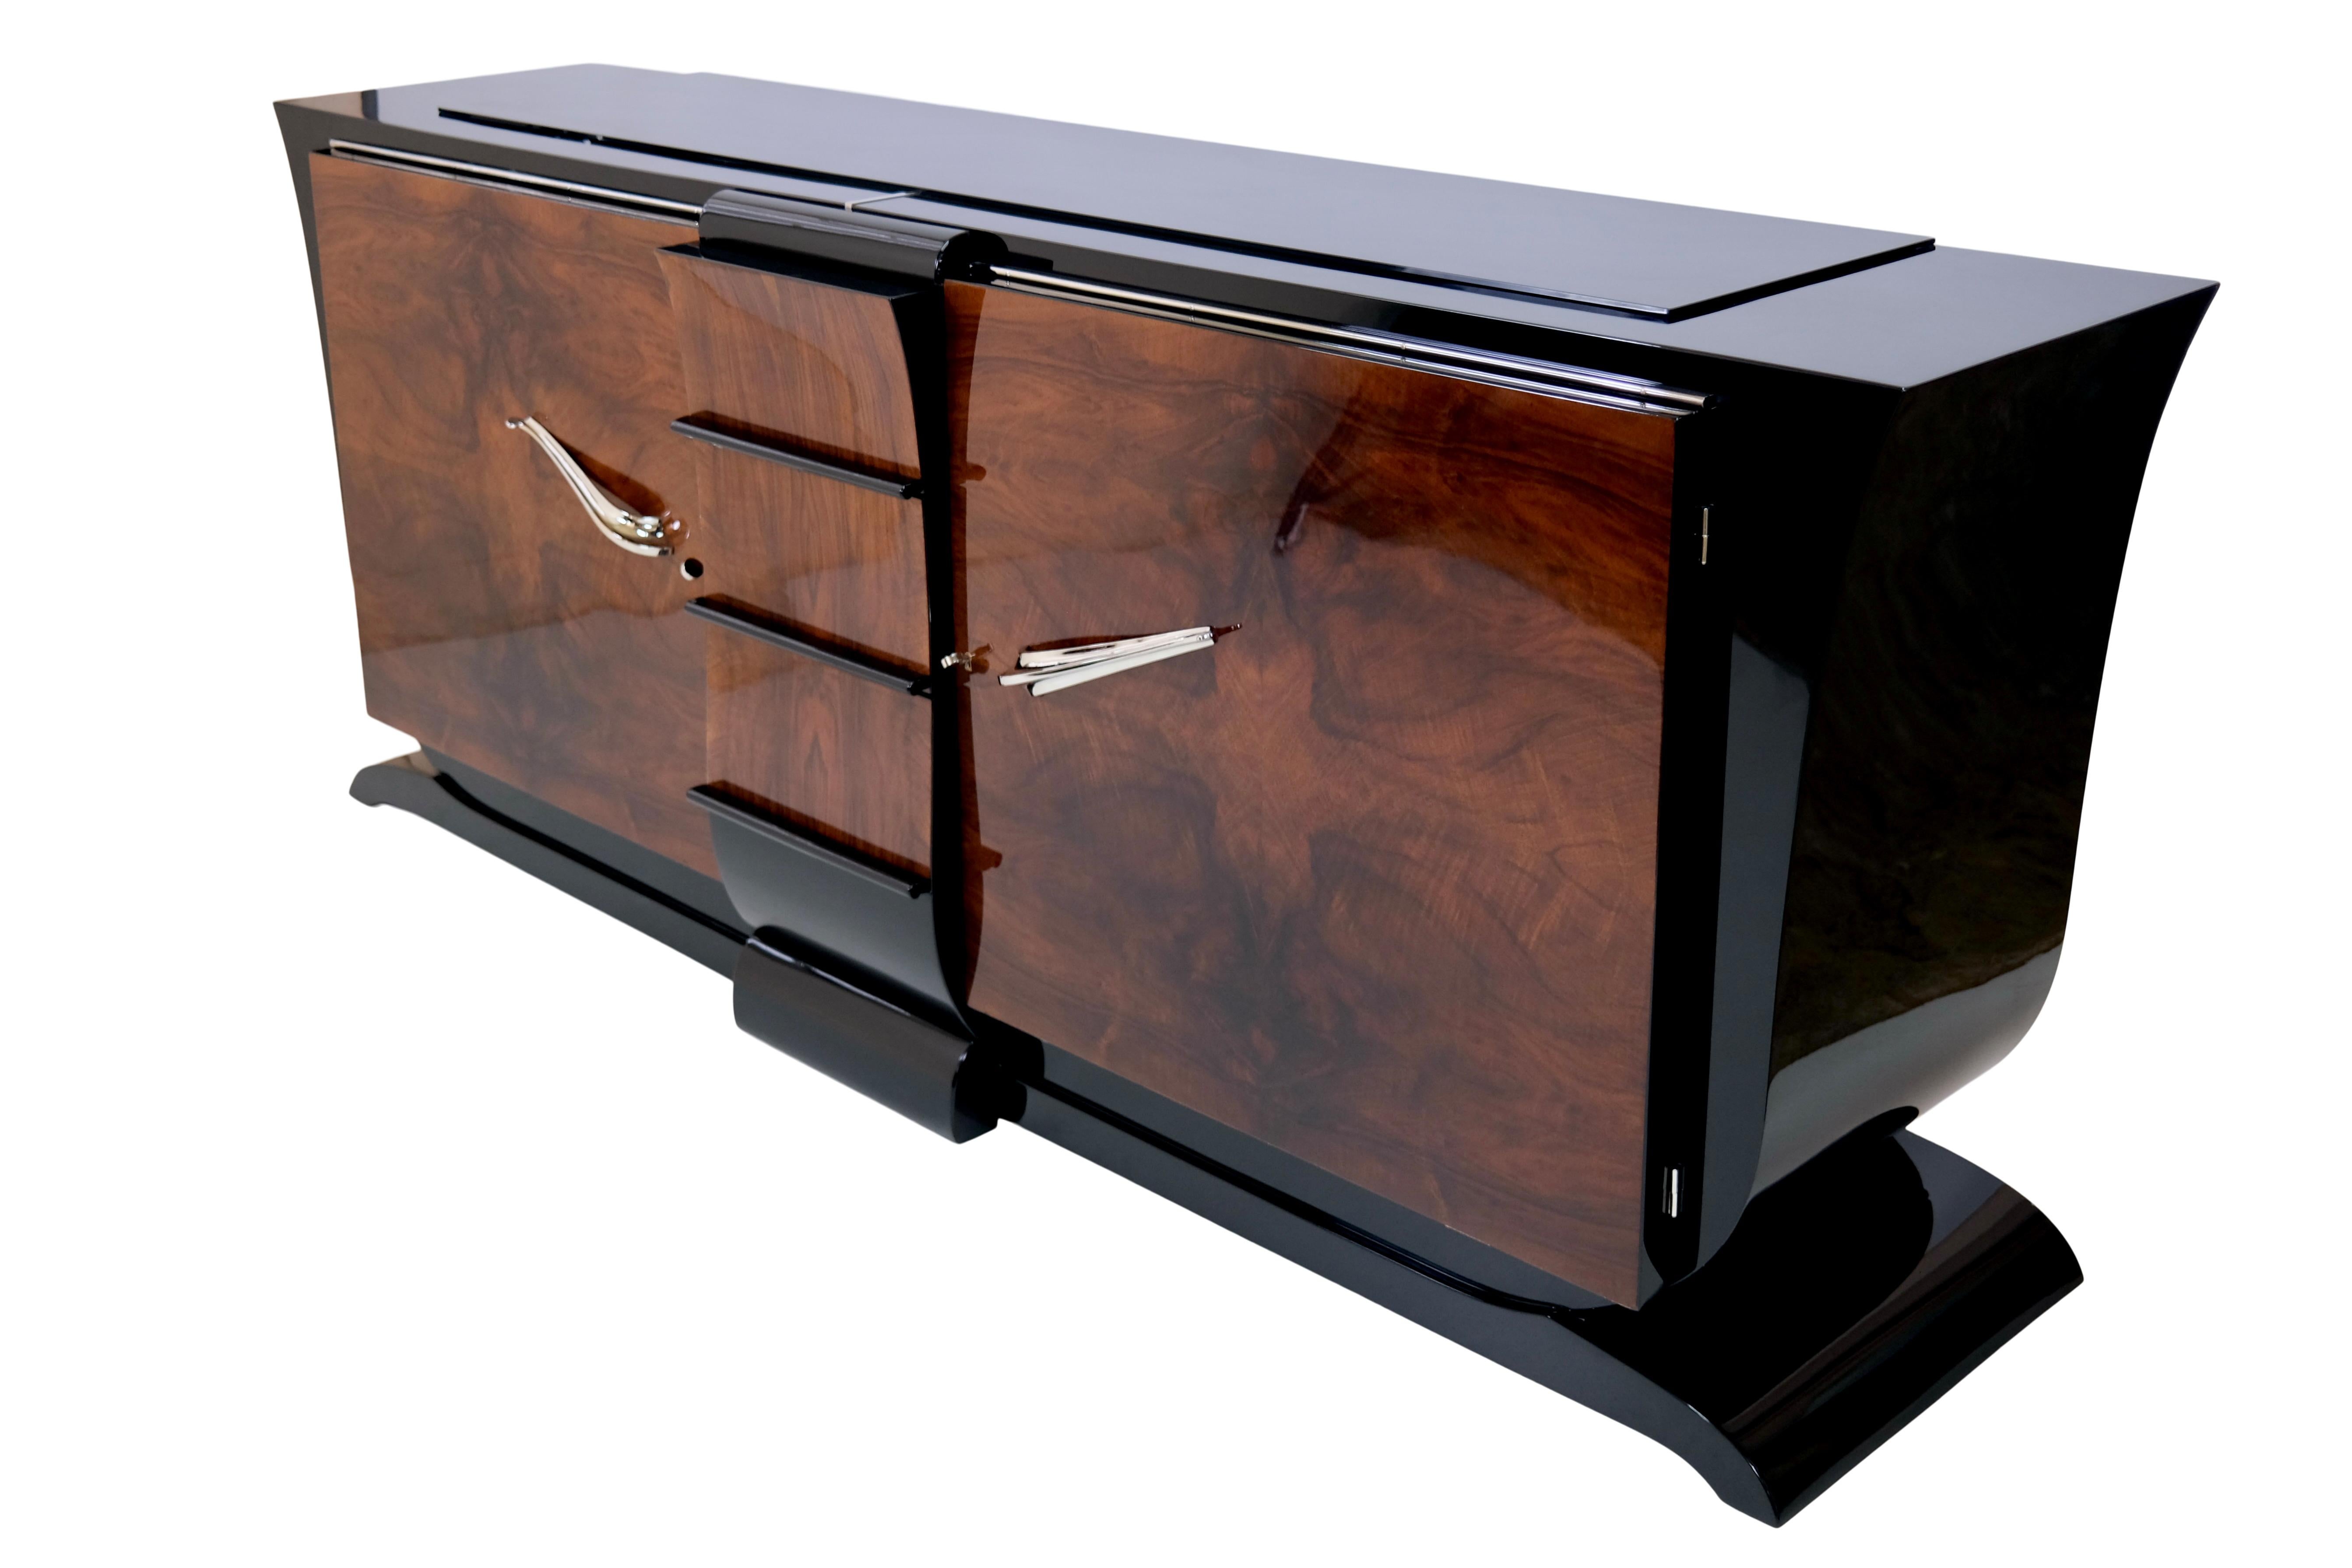 Blackened French 1930s Art Deco Sideboard with Nutwood Veneer and Black Lacquer Body